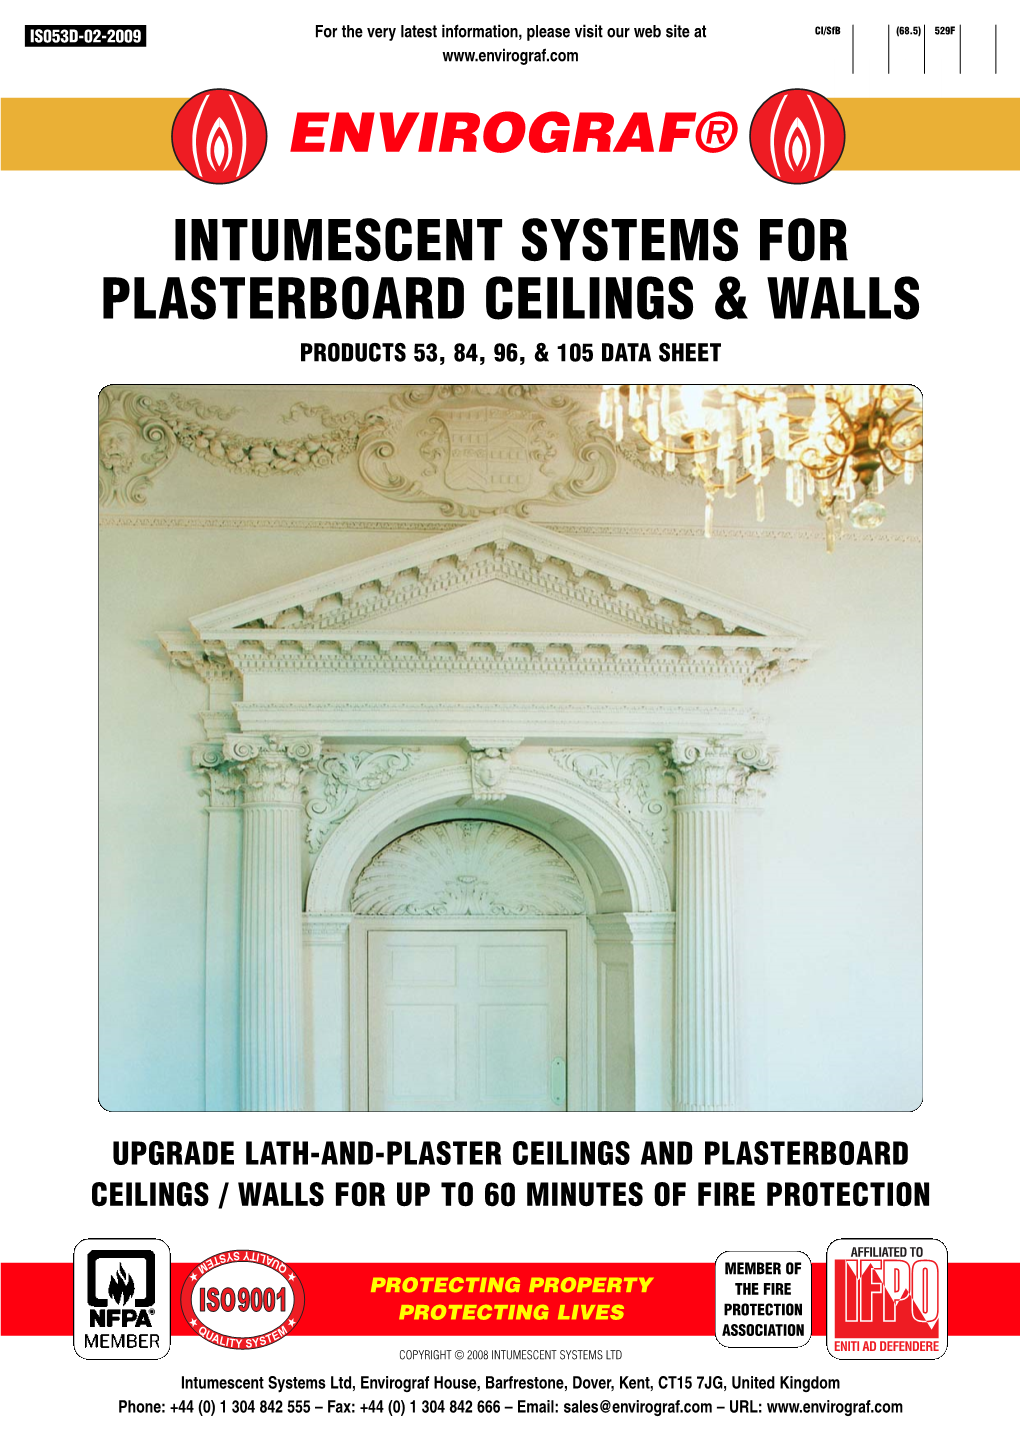 Intumescent Systems for Plasterboard Ceilings & Walls Products 53, 84, 96, & 105 Data Sheet